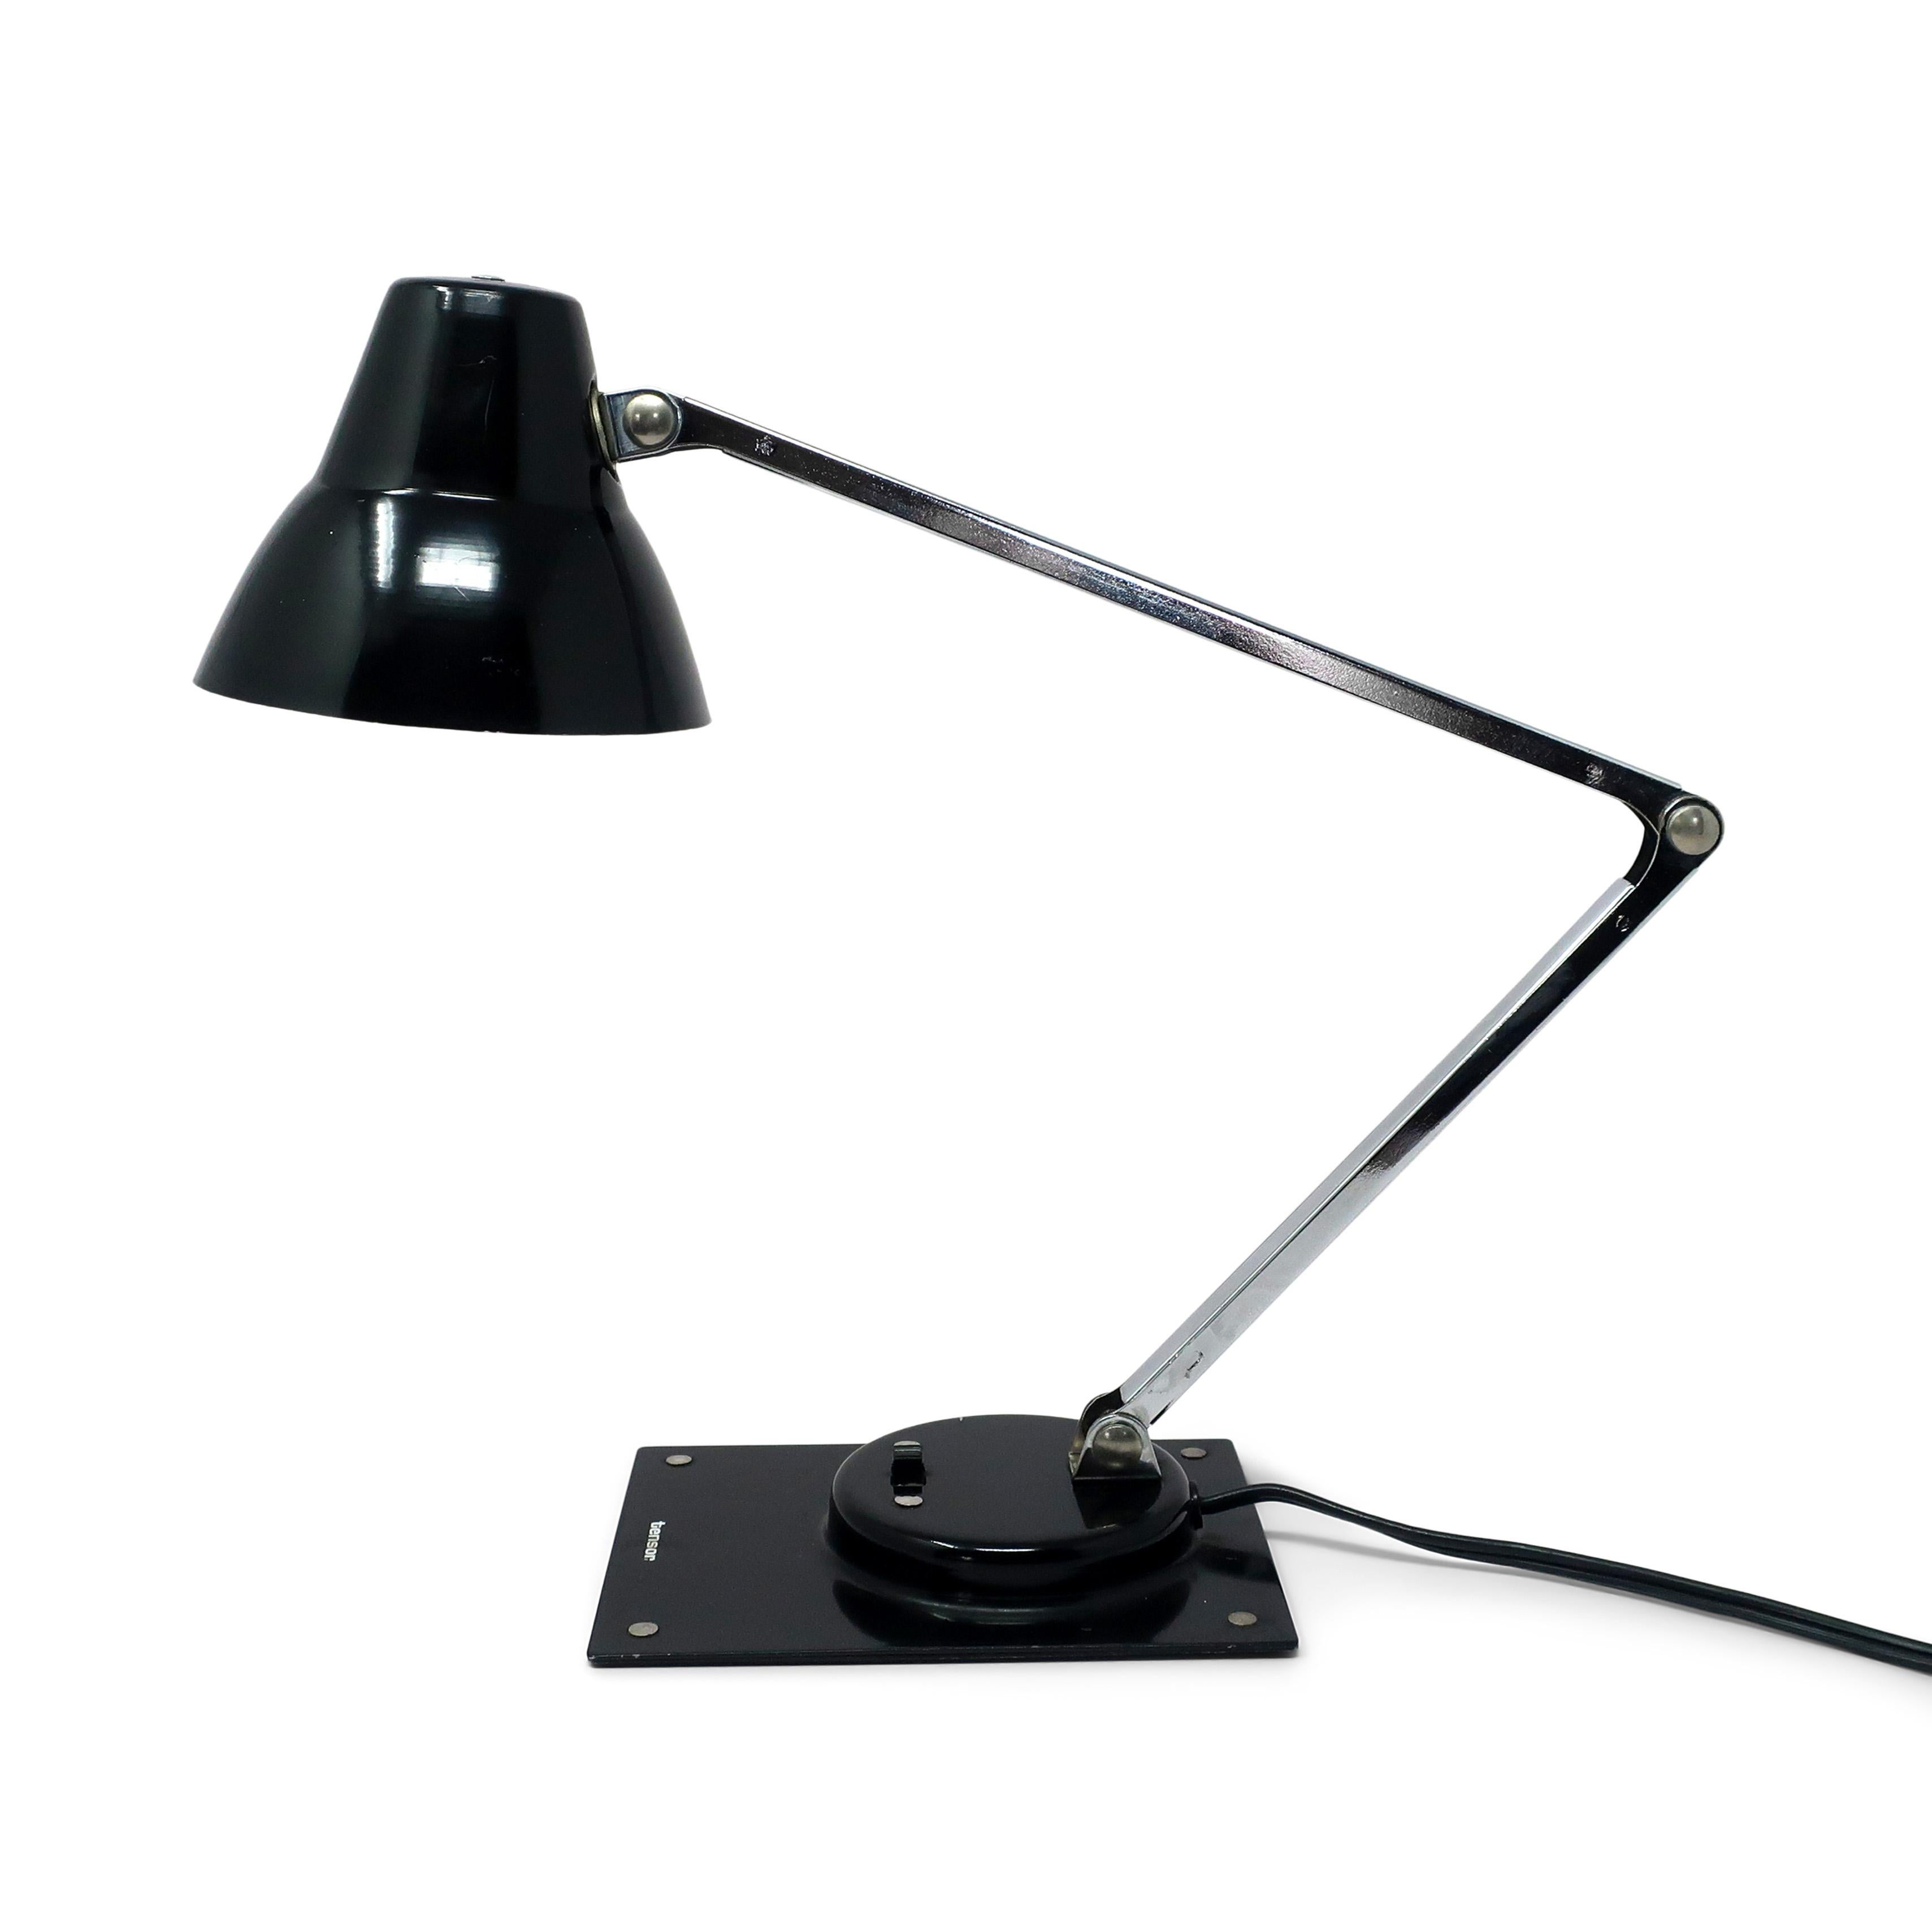 A perfect mid-century modern Tensor IL 400 articulating desk lamp.  Black base and shade, chrome stem, and switch on the base.  In good vintage condition.

4